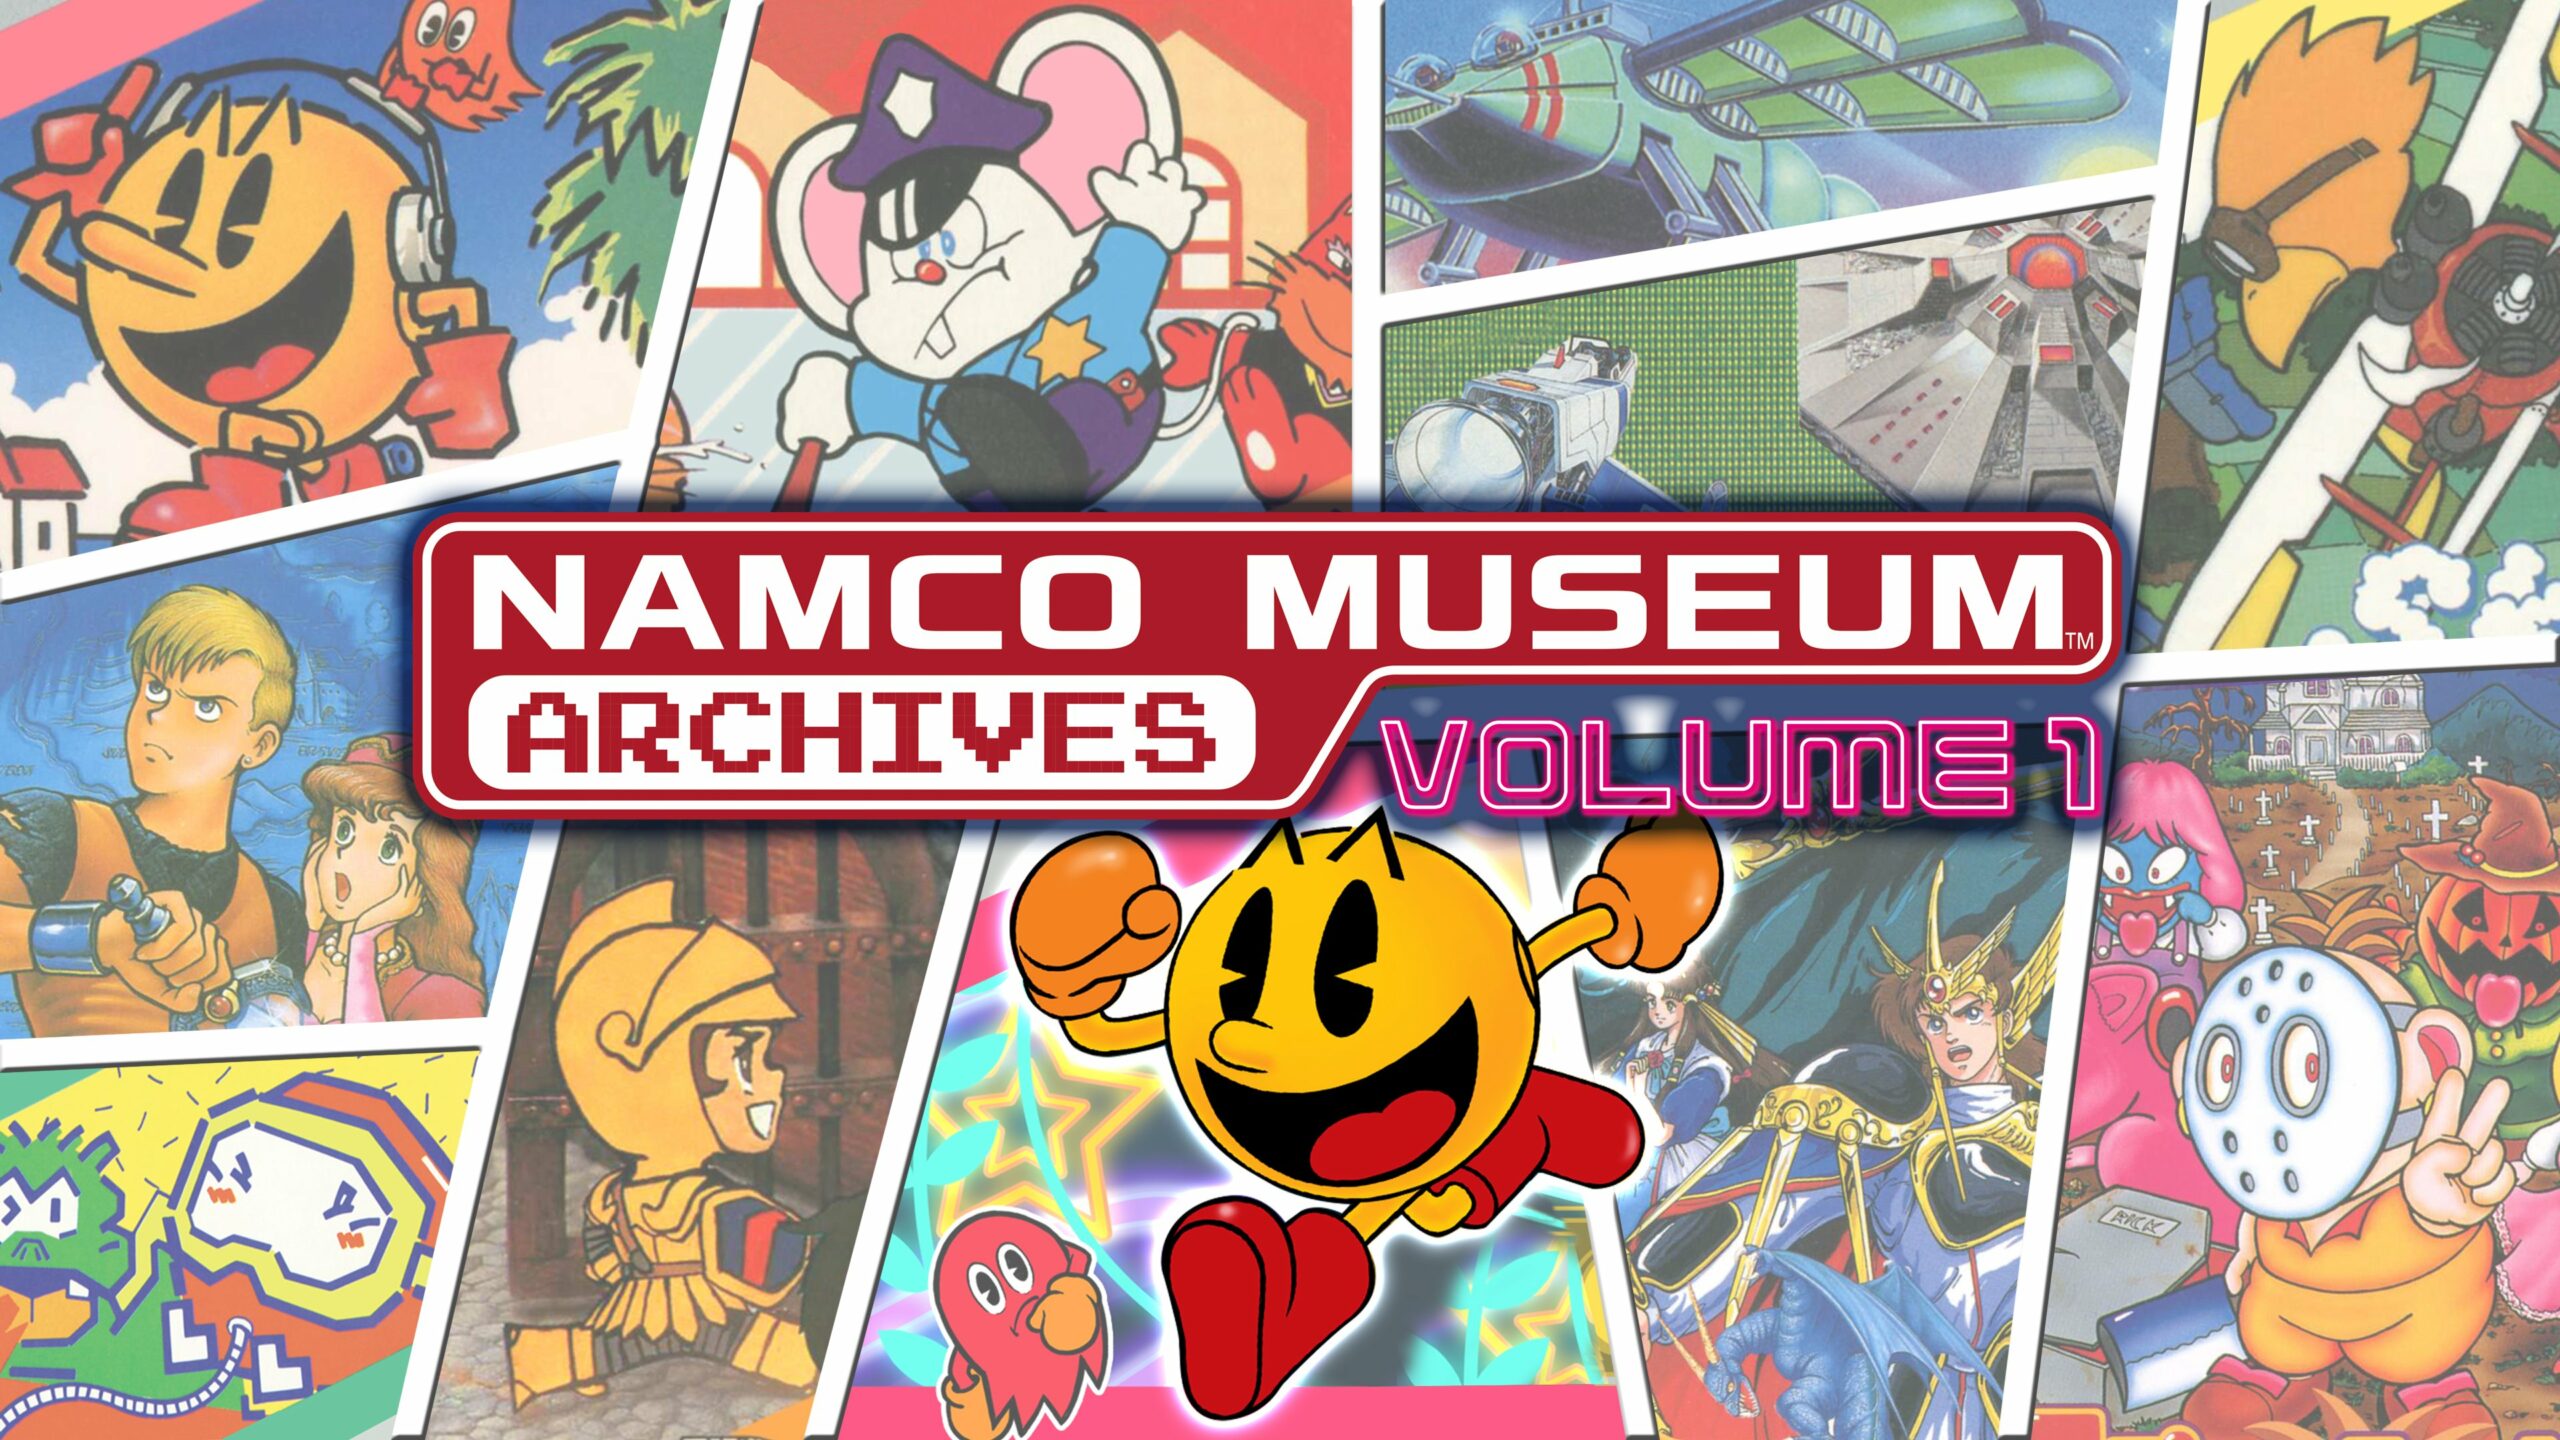 Namco-Museum-Archives_2020_06-11-20_001-scaled.jpg